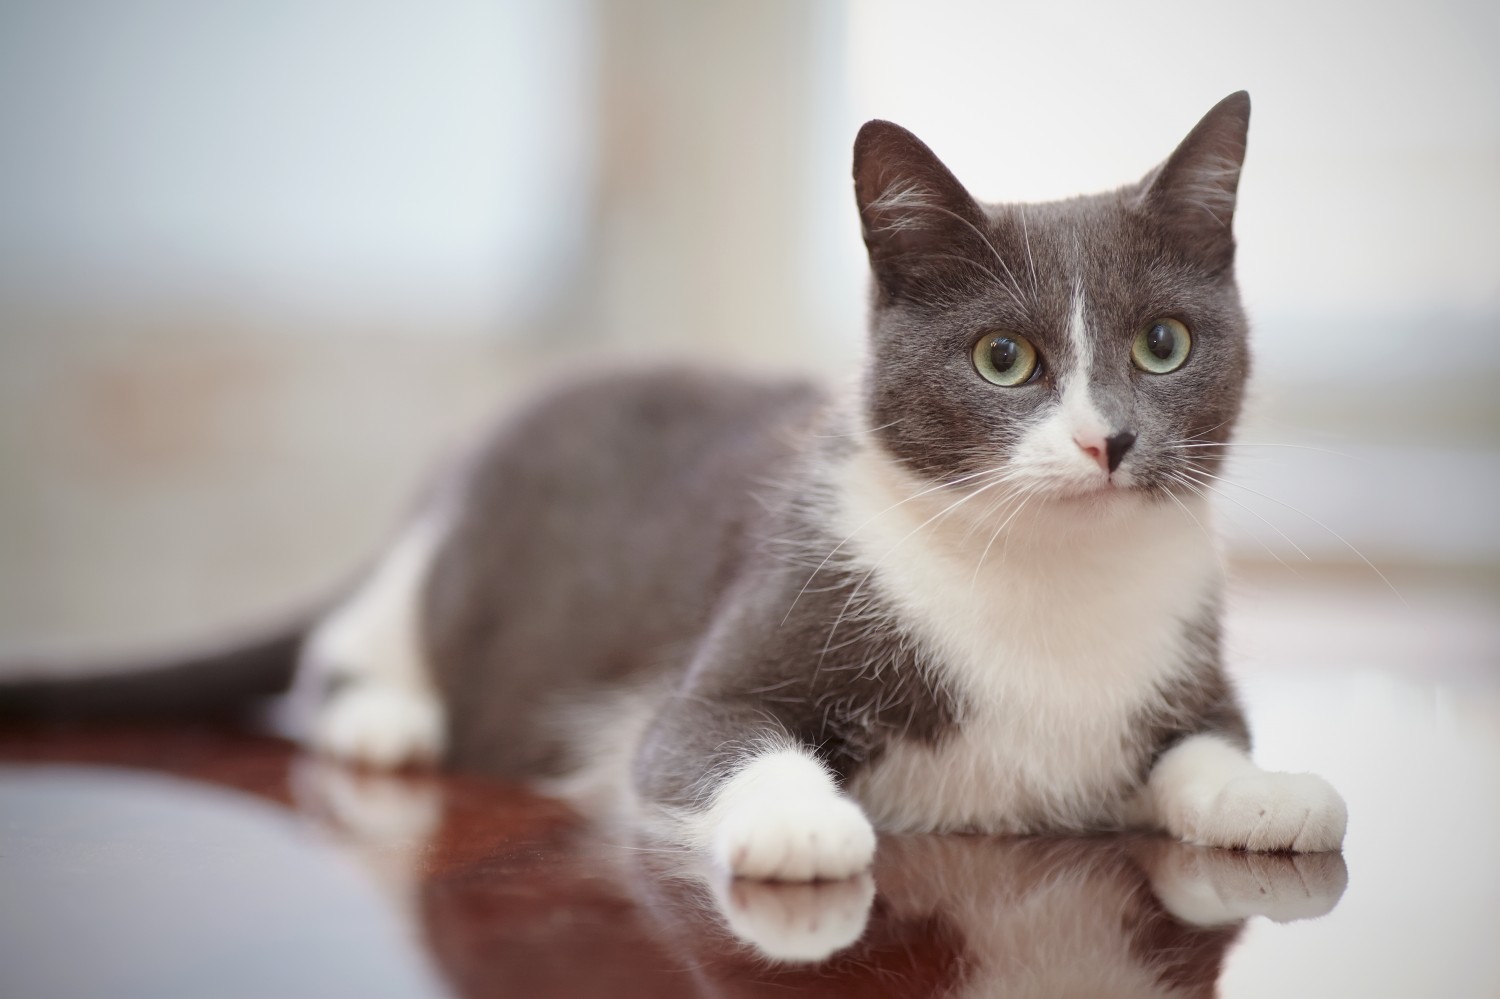 Gray and White cat sitting on wooden surface